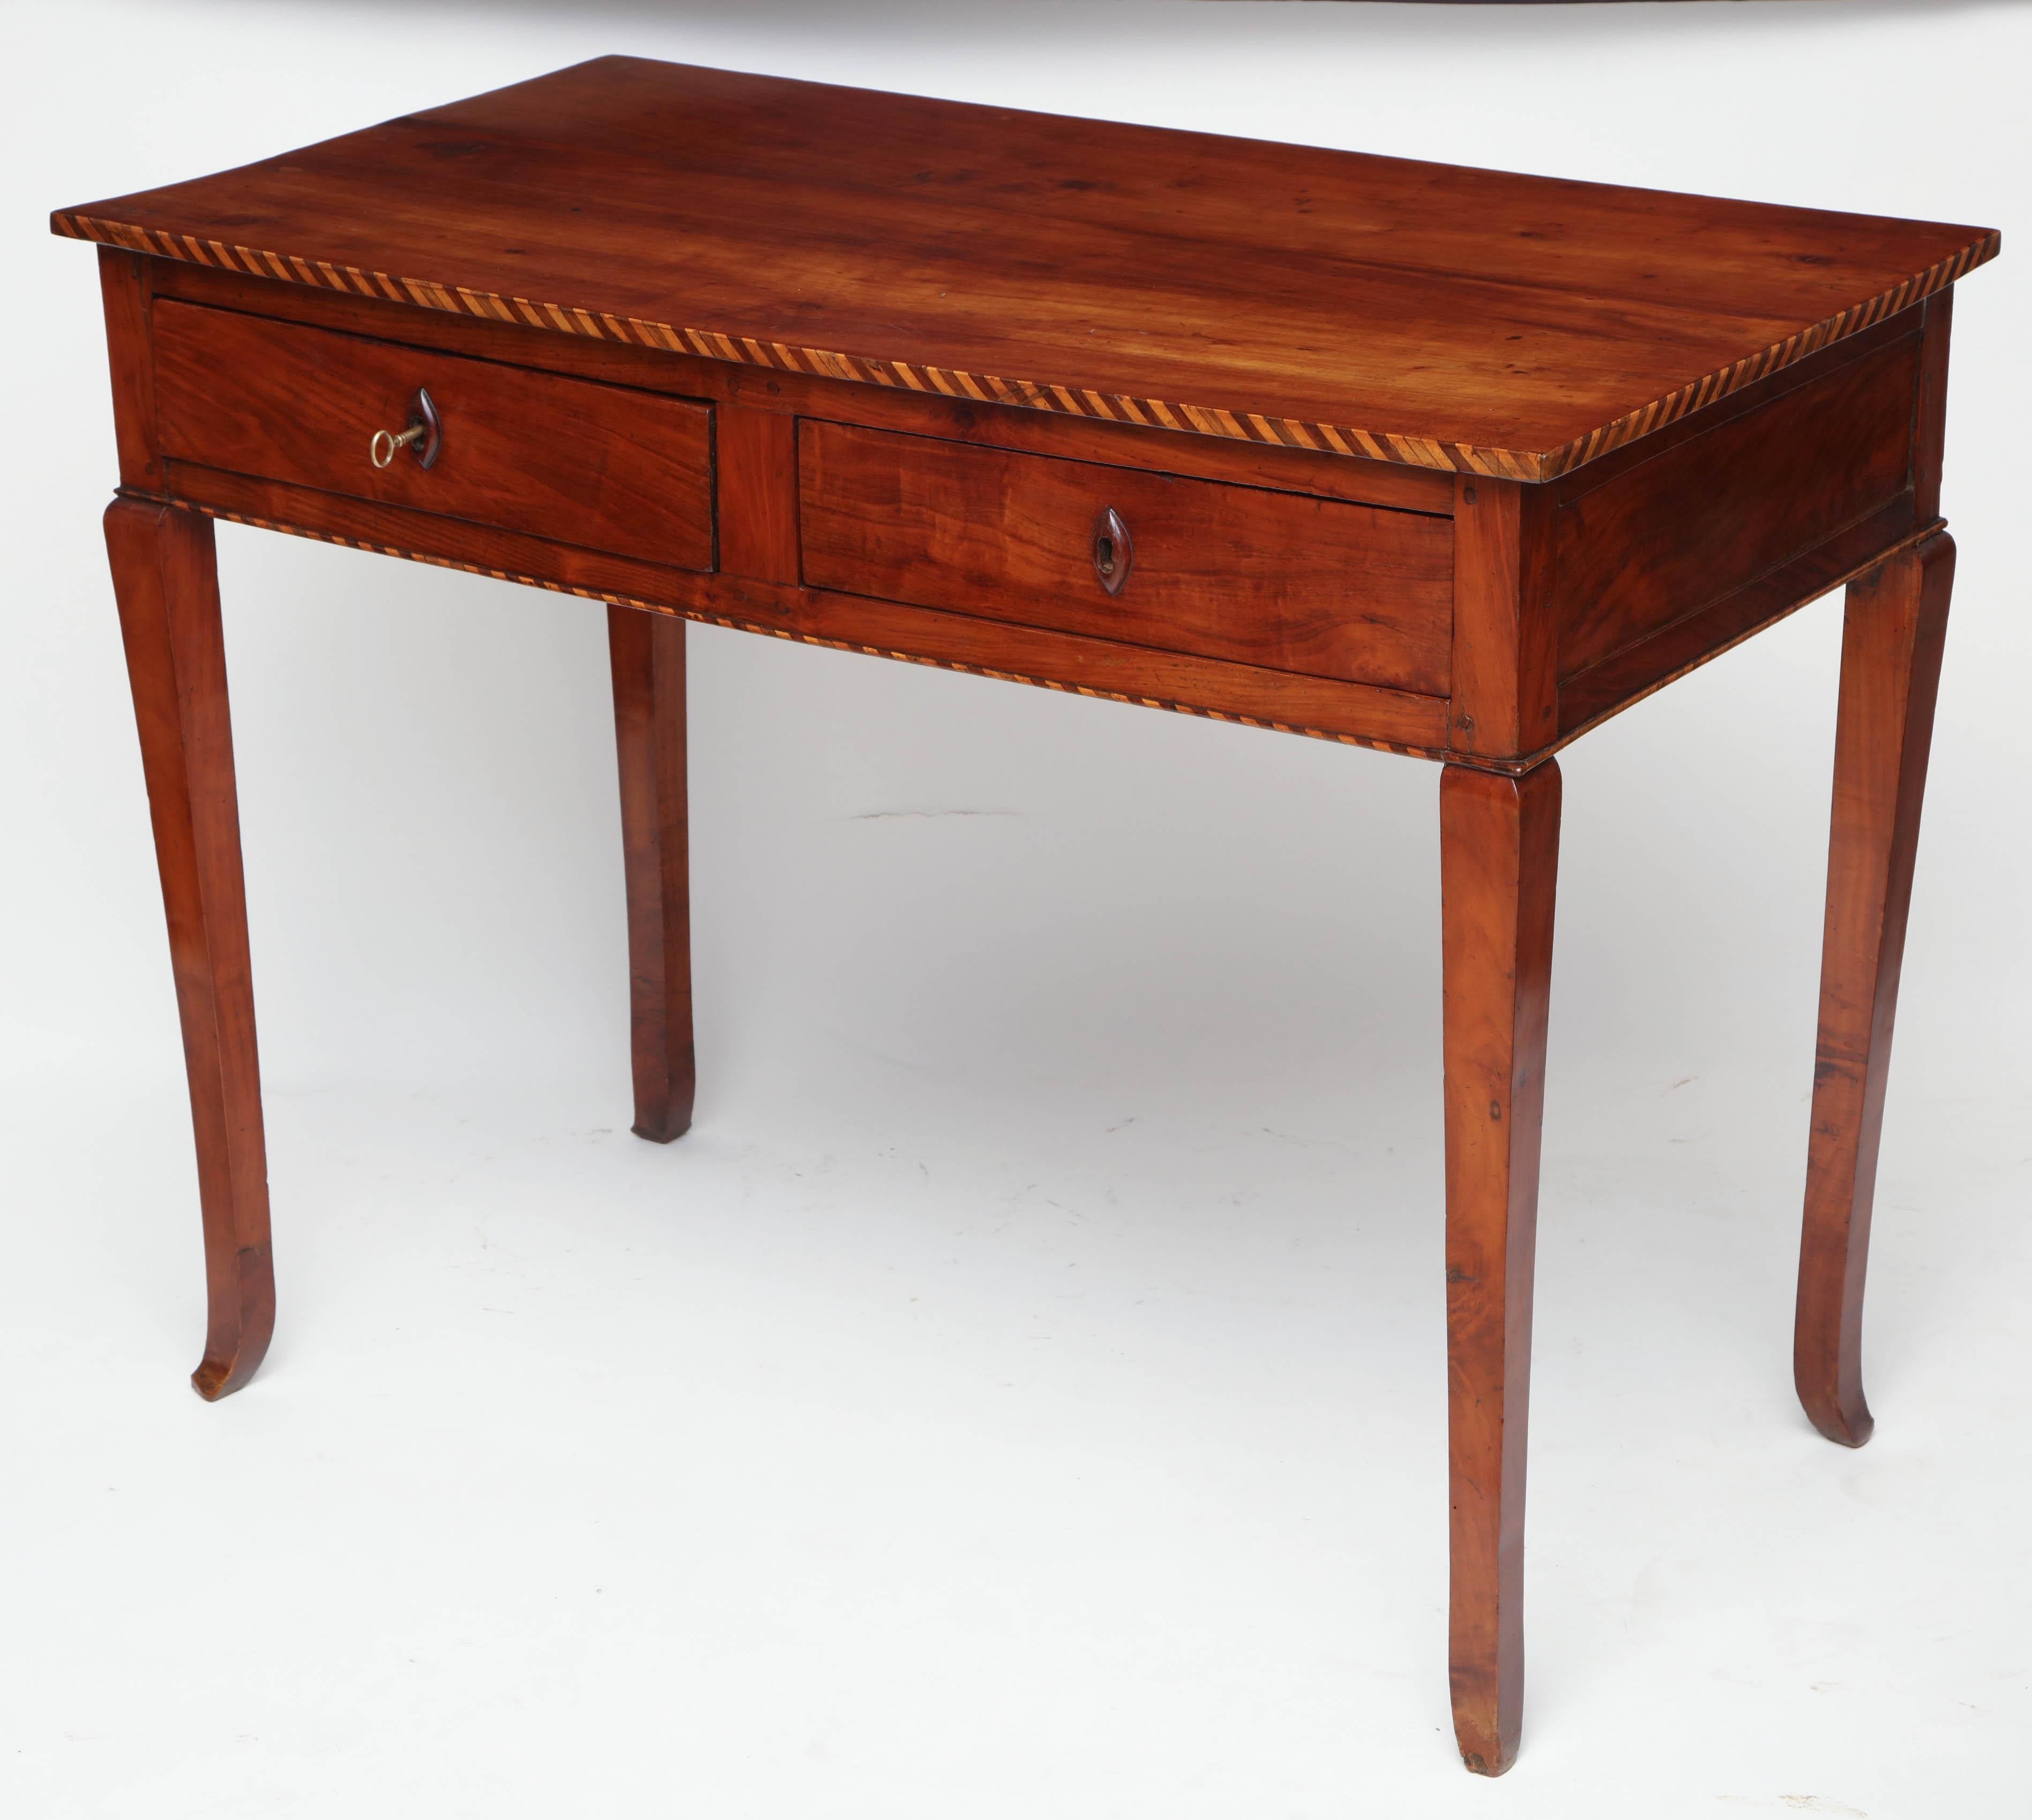 Cherry table with two drawers, parquetry border, finished back, carved wood escutcheons and tapered legs, Italy, circa 1780.

Overall dimensions: 41.5” W, 22” D, 31.5” H


Available to see in our NYC Showroom 
BK Antiques
306 East 61st St. 2nd